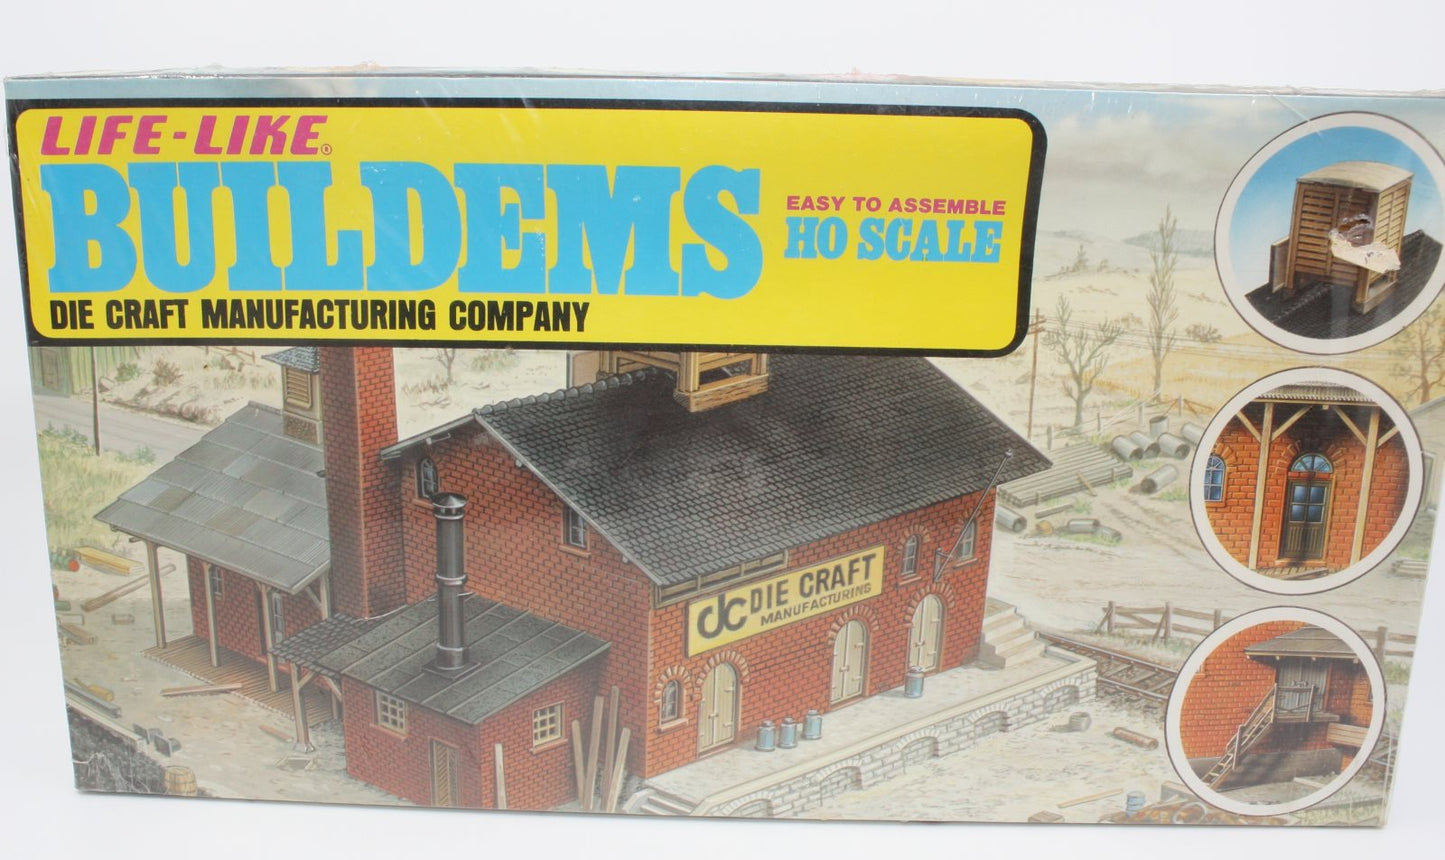 Life Like S-388 HO Die Craft Manufacturing Company Building Kit